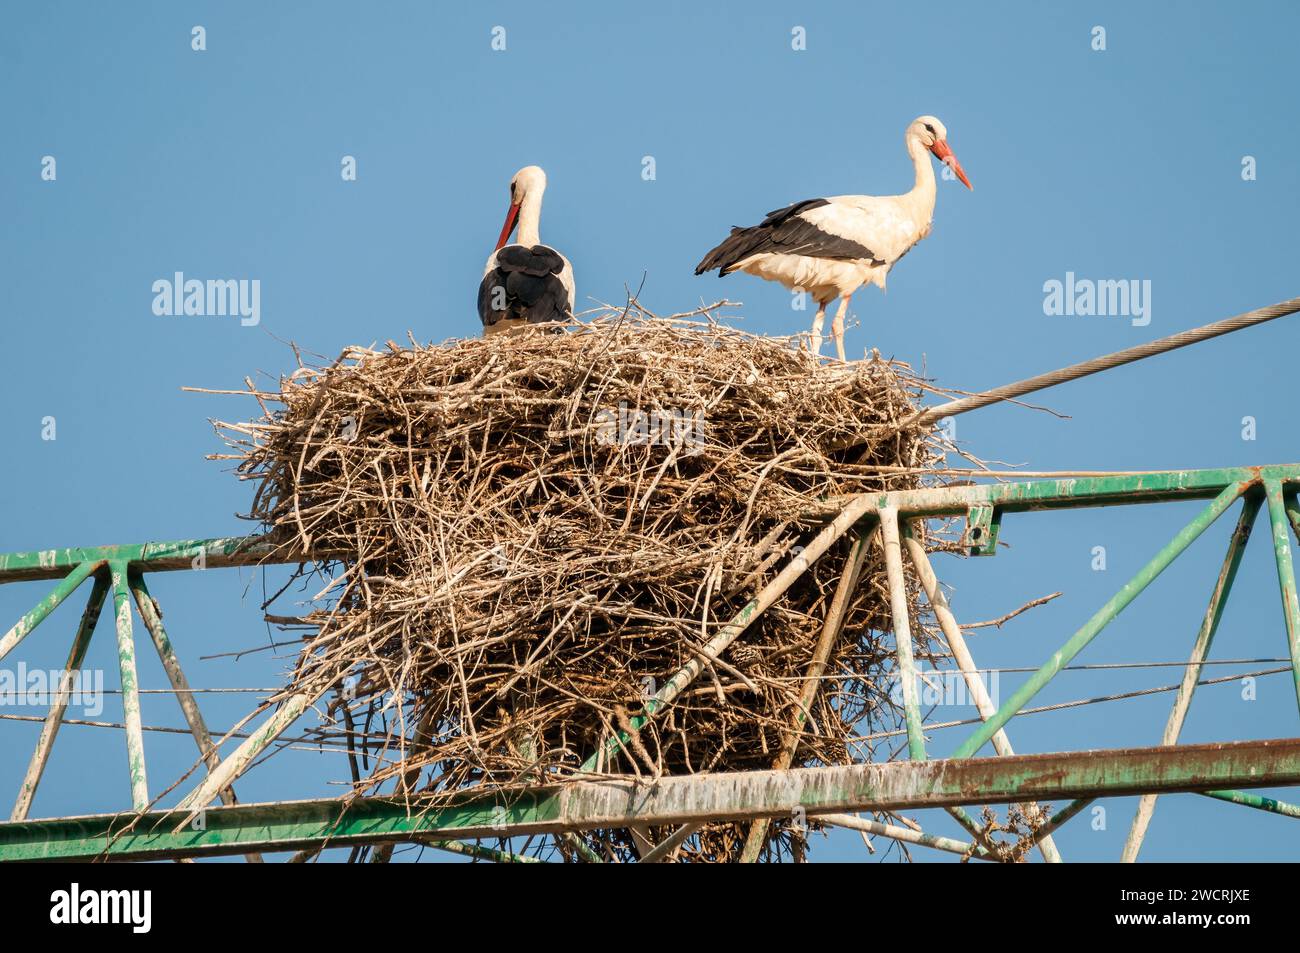 white stork in the nest, Ciconia ciconia, on a crane, Balaguer, Lleida, Catalonia, Spain Stock Photo